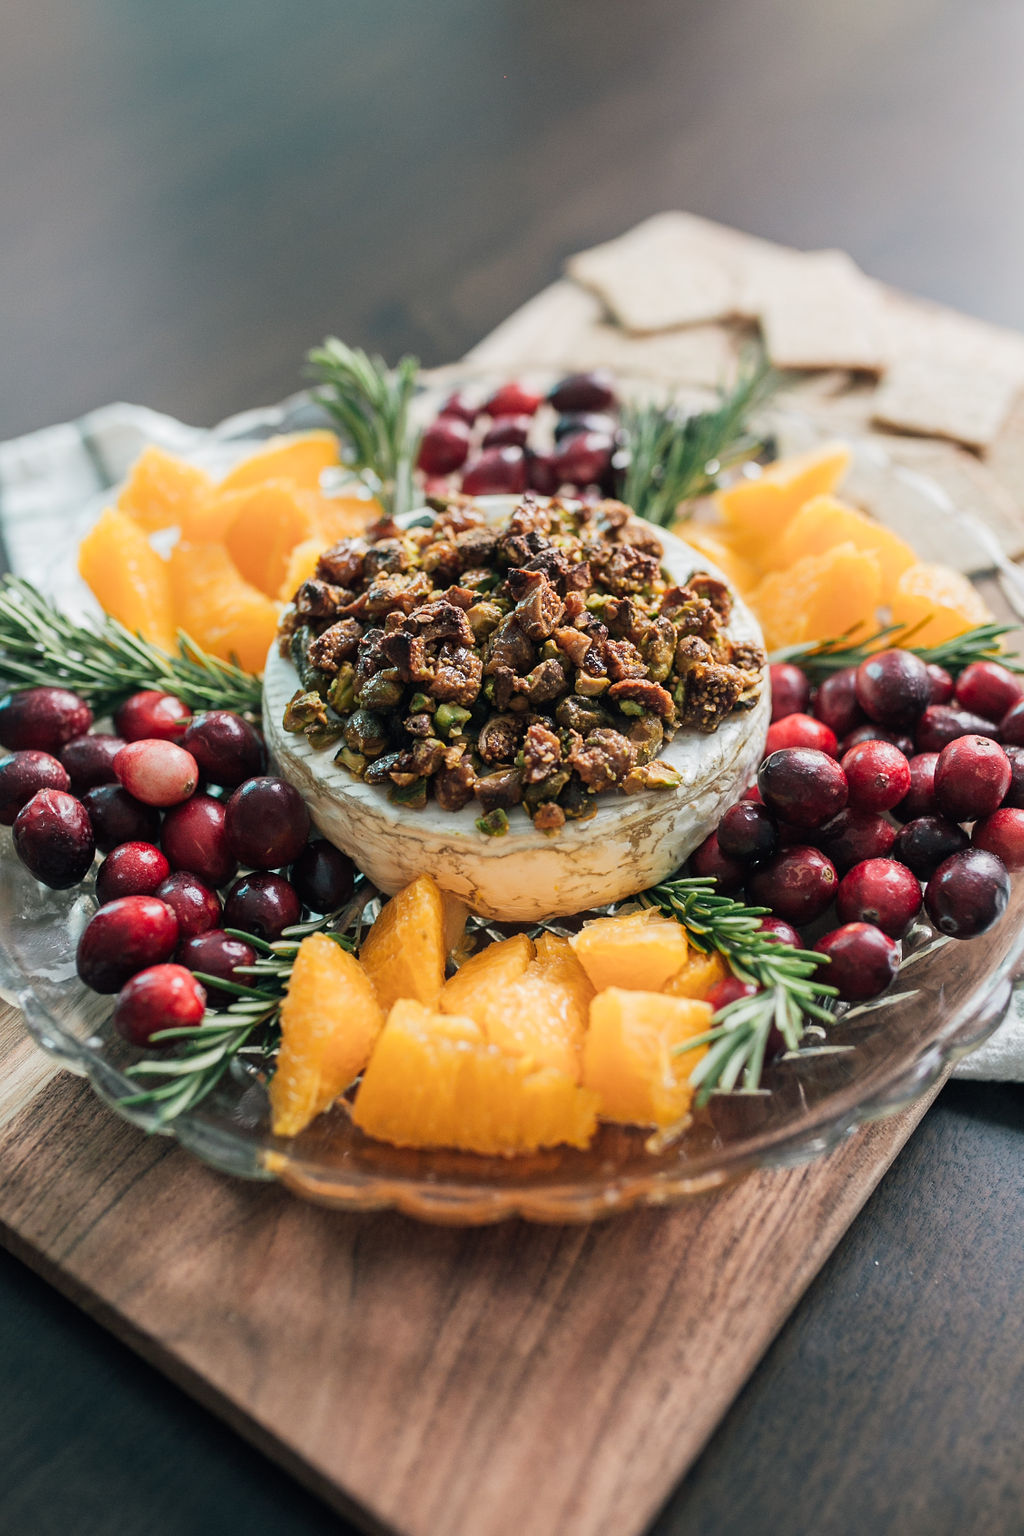 Klaus Baked Brie with Figs, Oranges and Pistachios